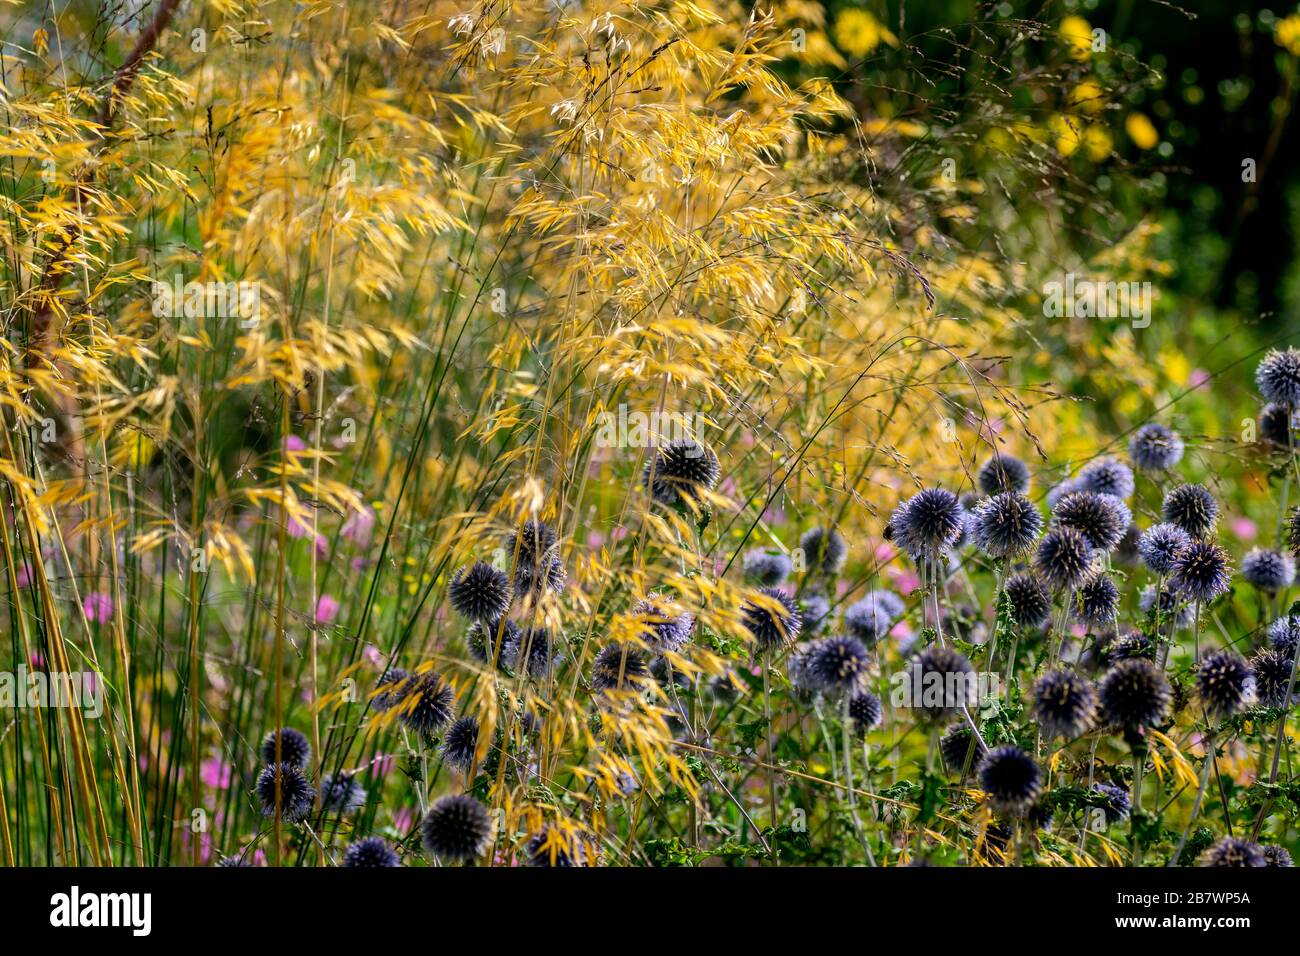 A flower border with grasses and globe thistles in a dramatic display of colour and form Stock Photo